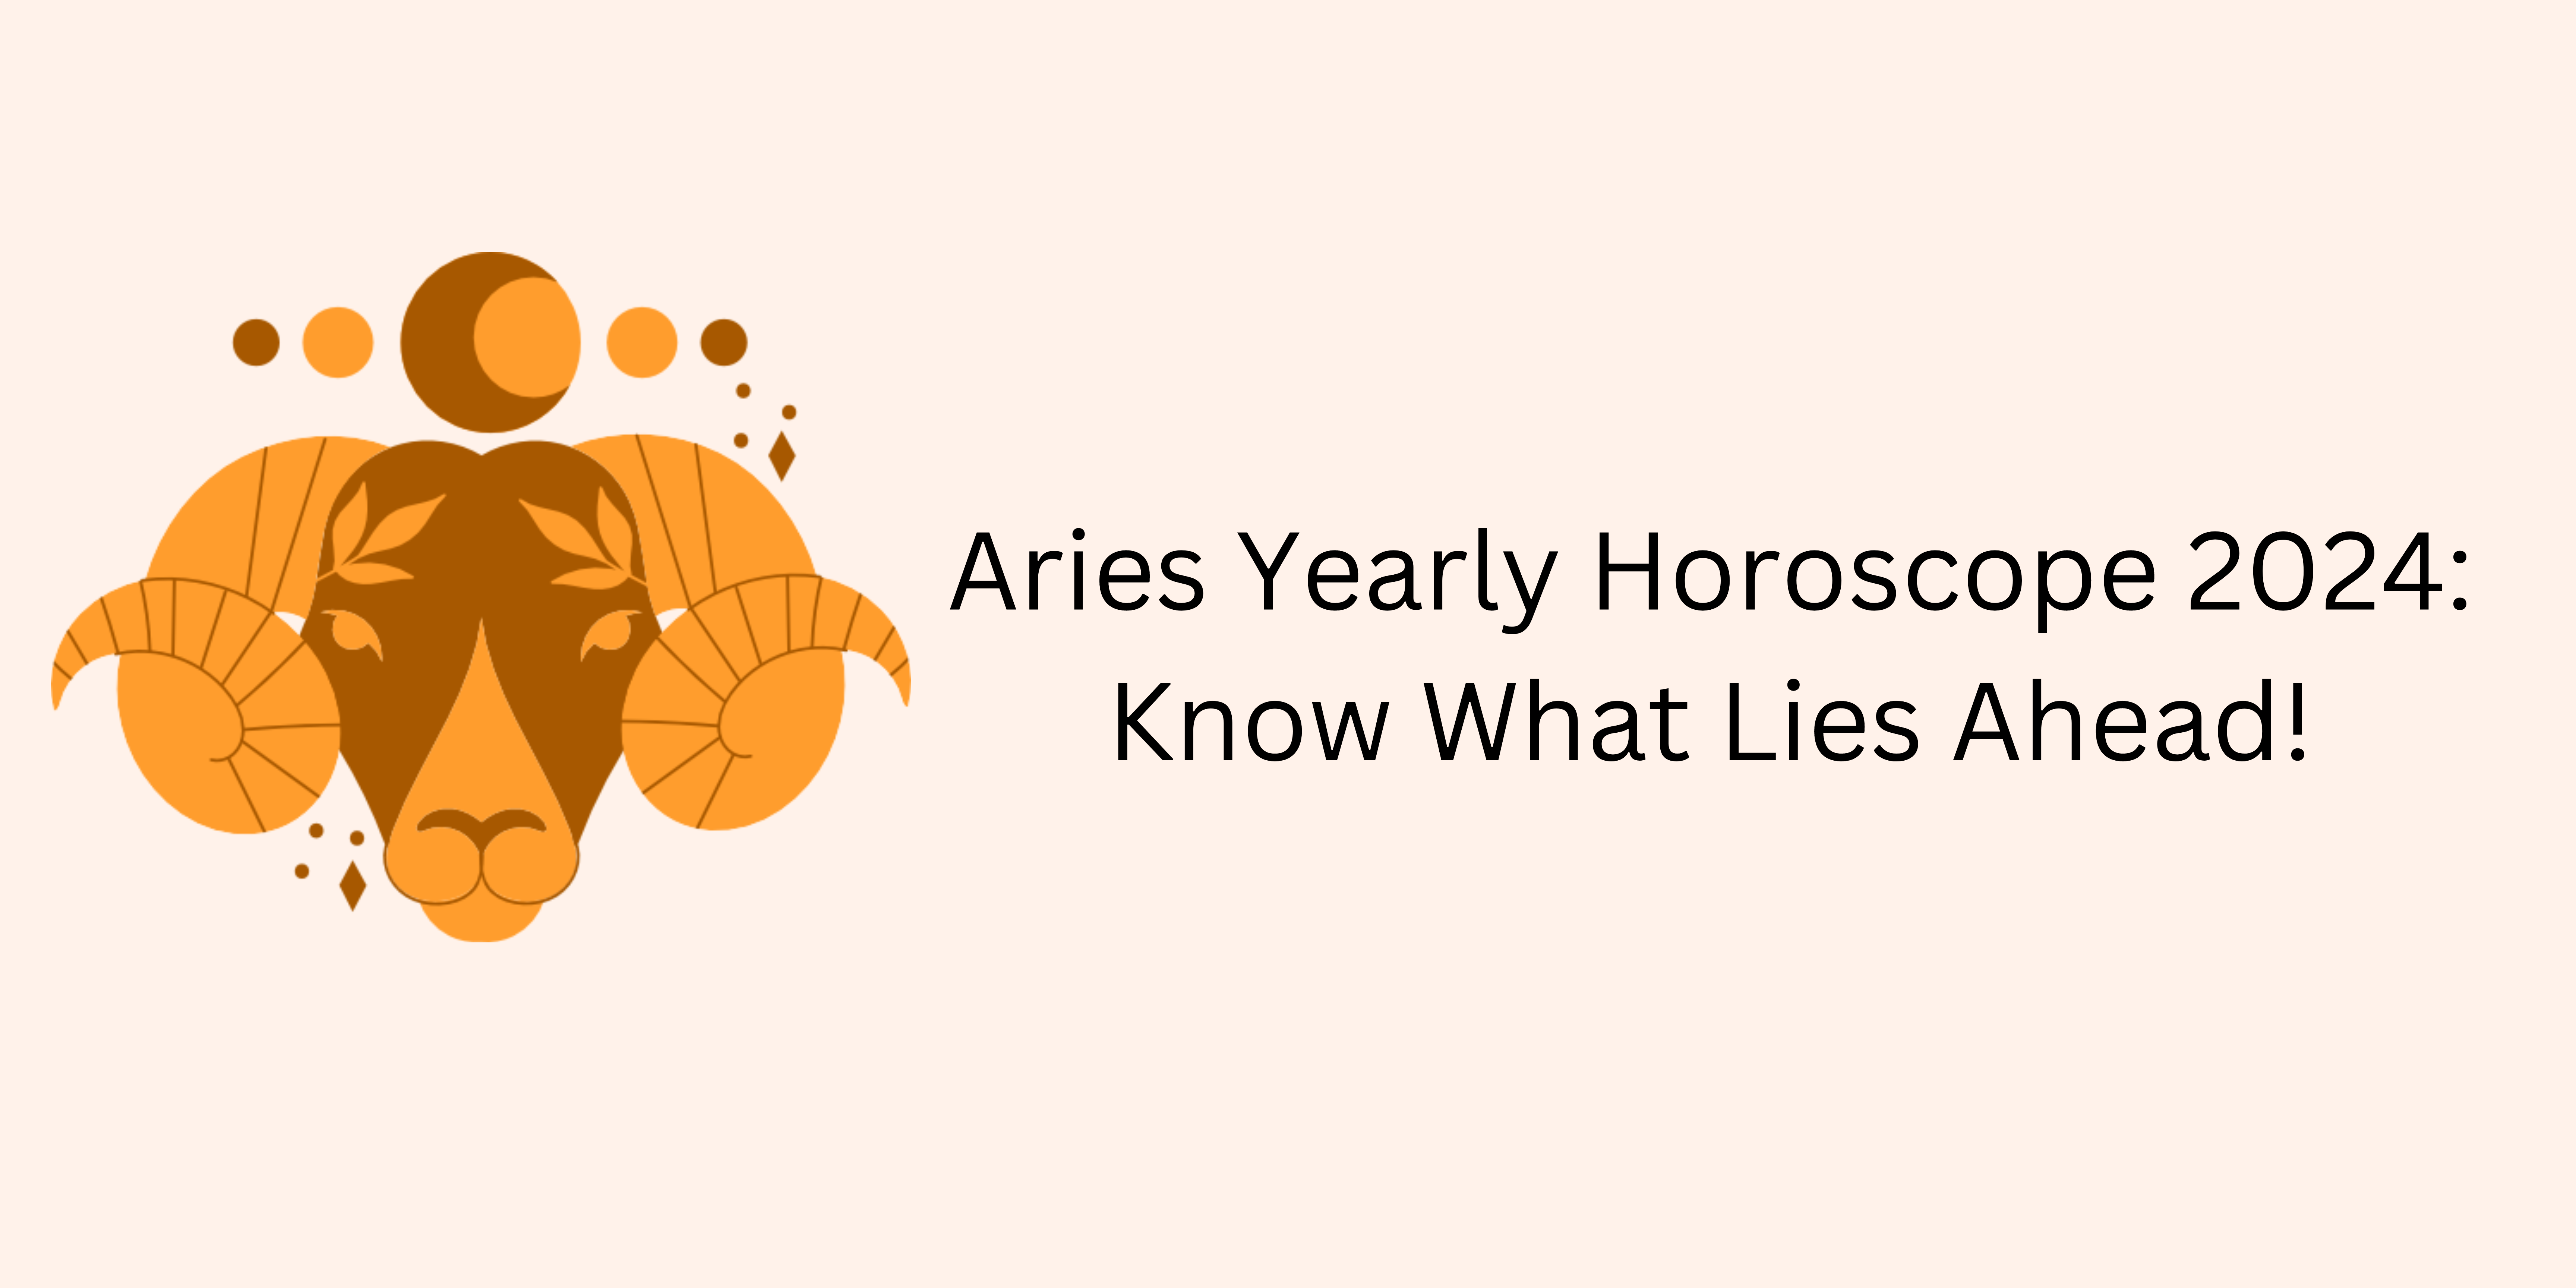 Aries Yearly Horoscope 2024: Know What Lies Ahead!